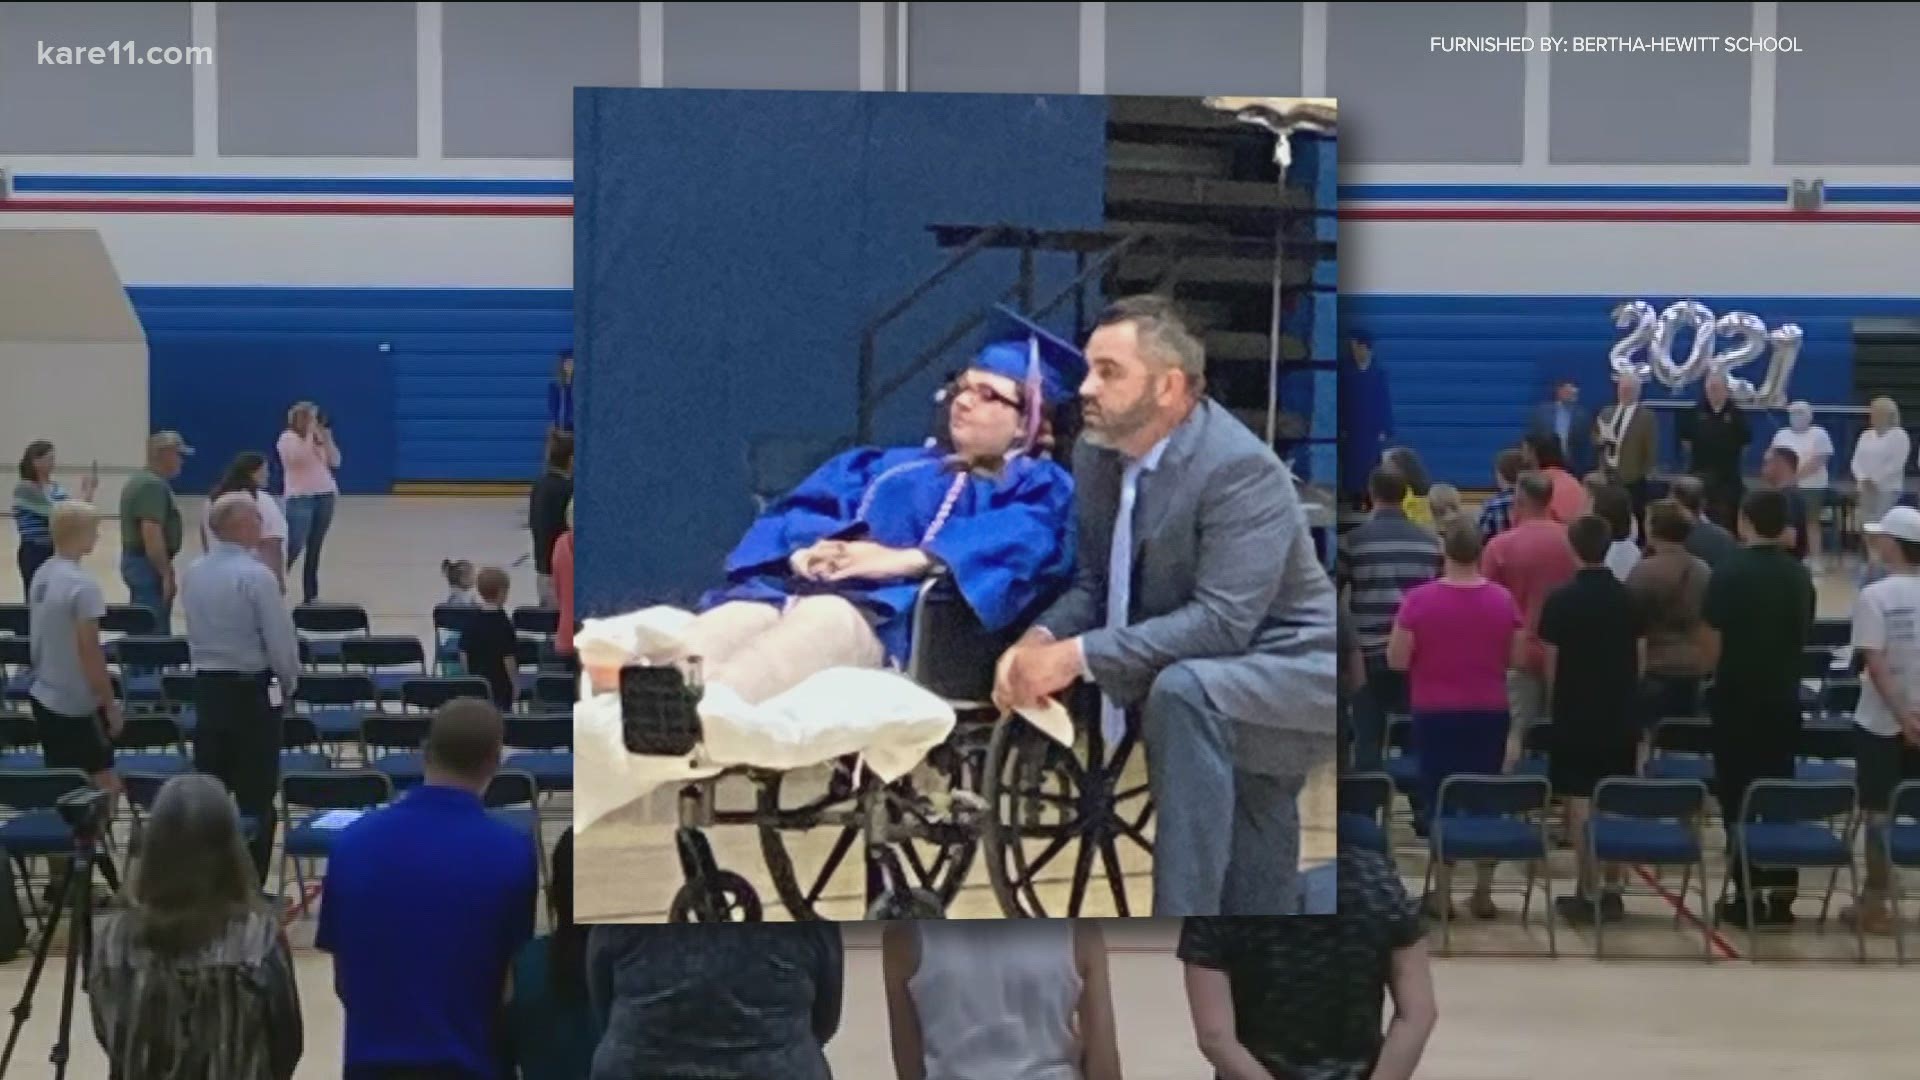 When a high school senior at Bertha-Hewitt broke both her legs at her graduation ceremony, her school made sure she could still cross the stage